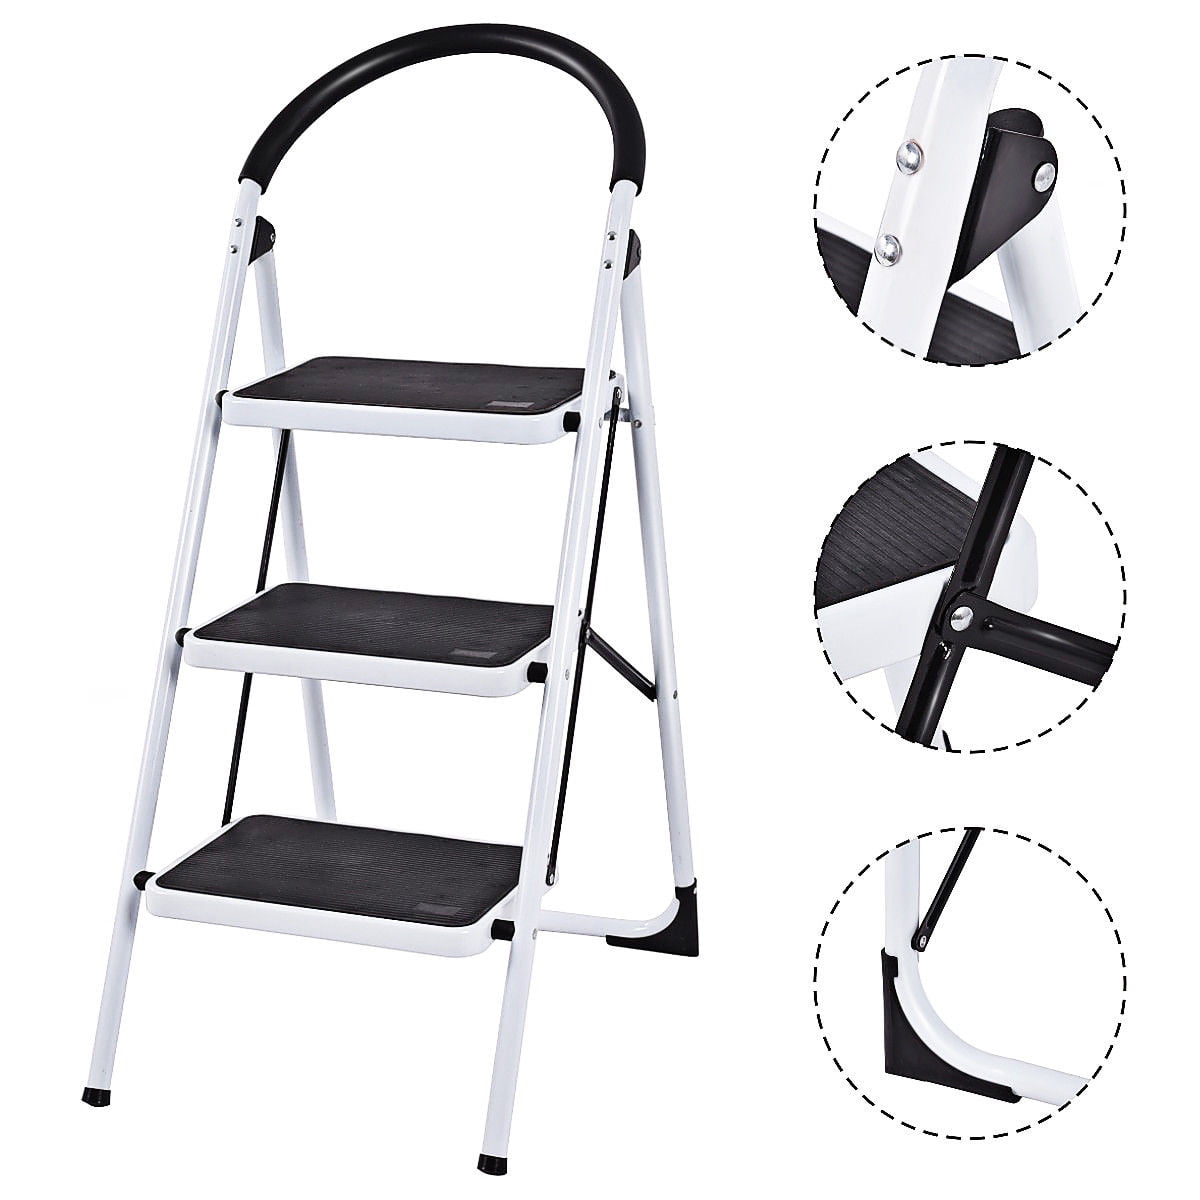 330Lbs 3 Step Ladder Folding Step Ladder Lightweight for Home Office Kitchen Sturdy Portable Step Ladder with Anti-Slip Pedal for Aldult 